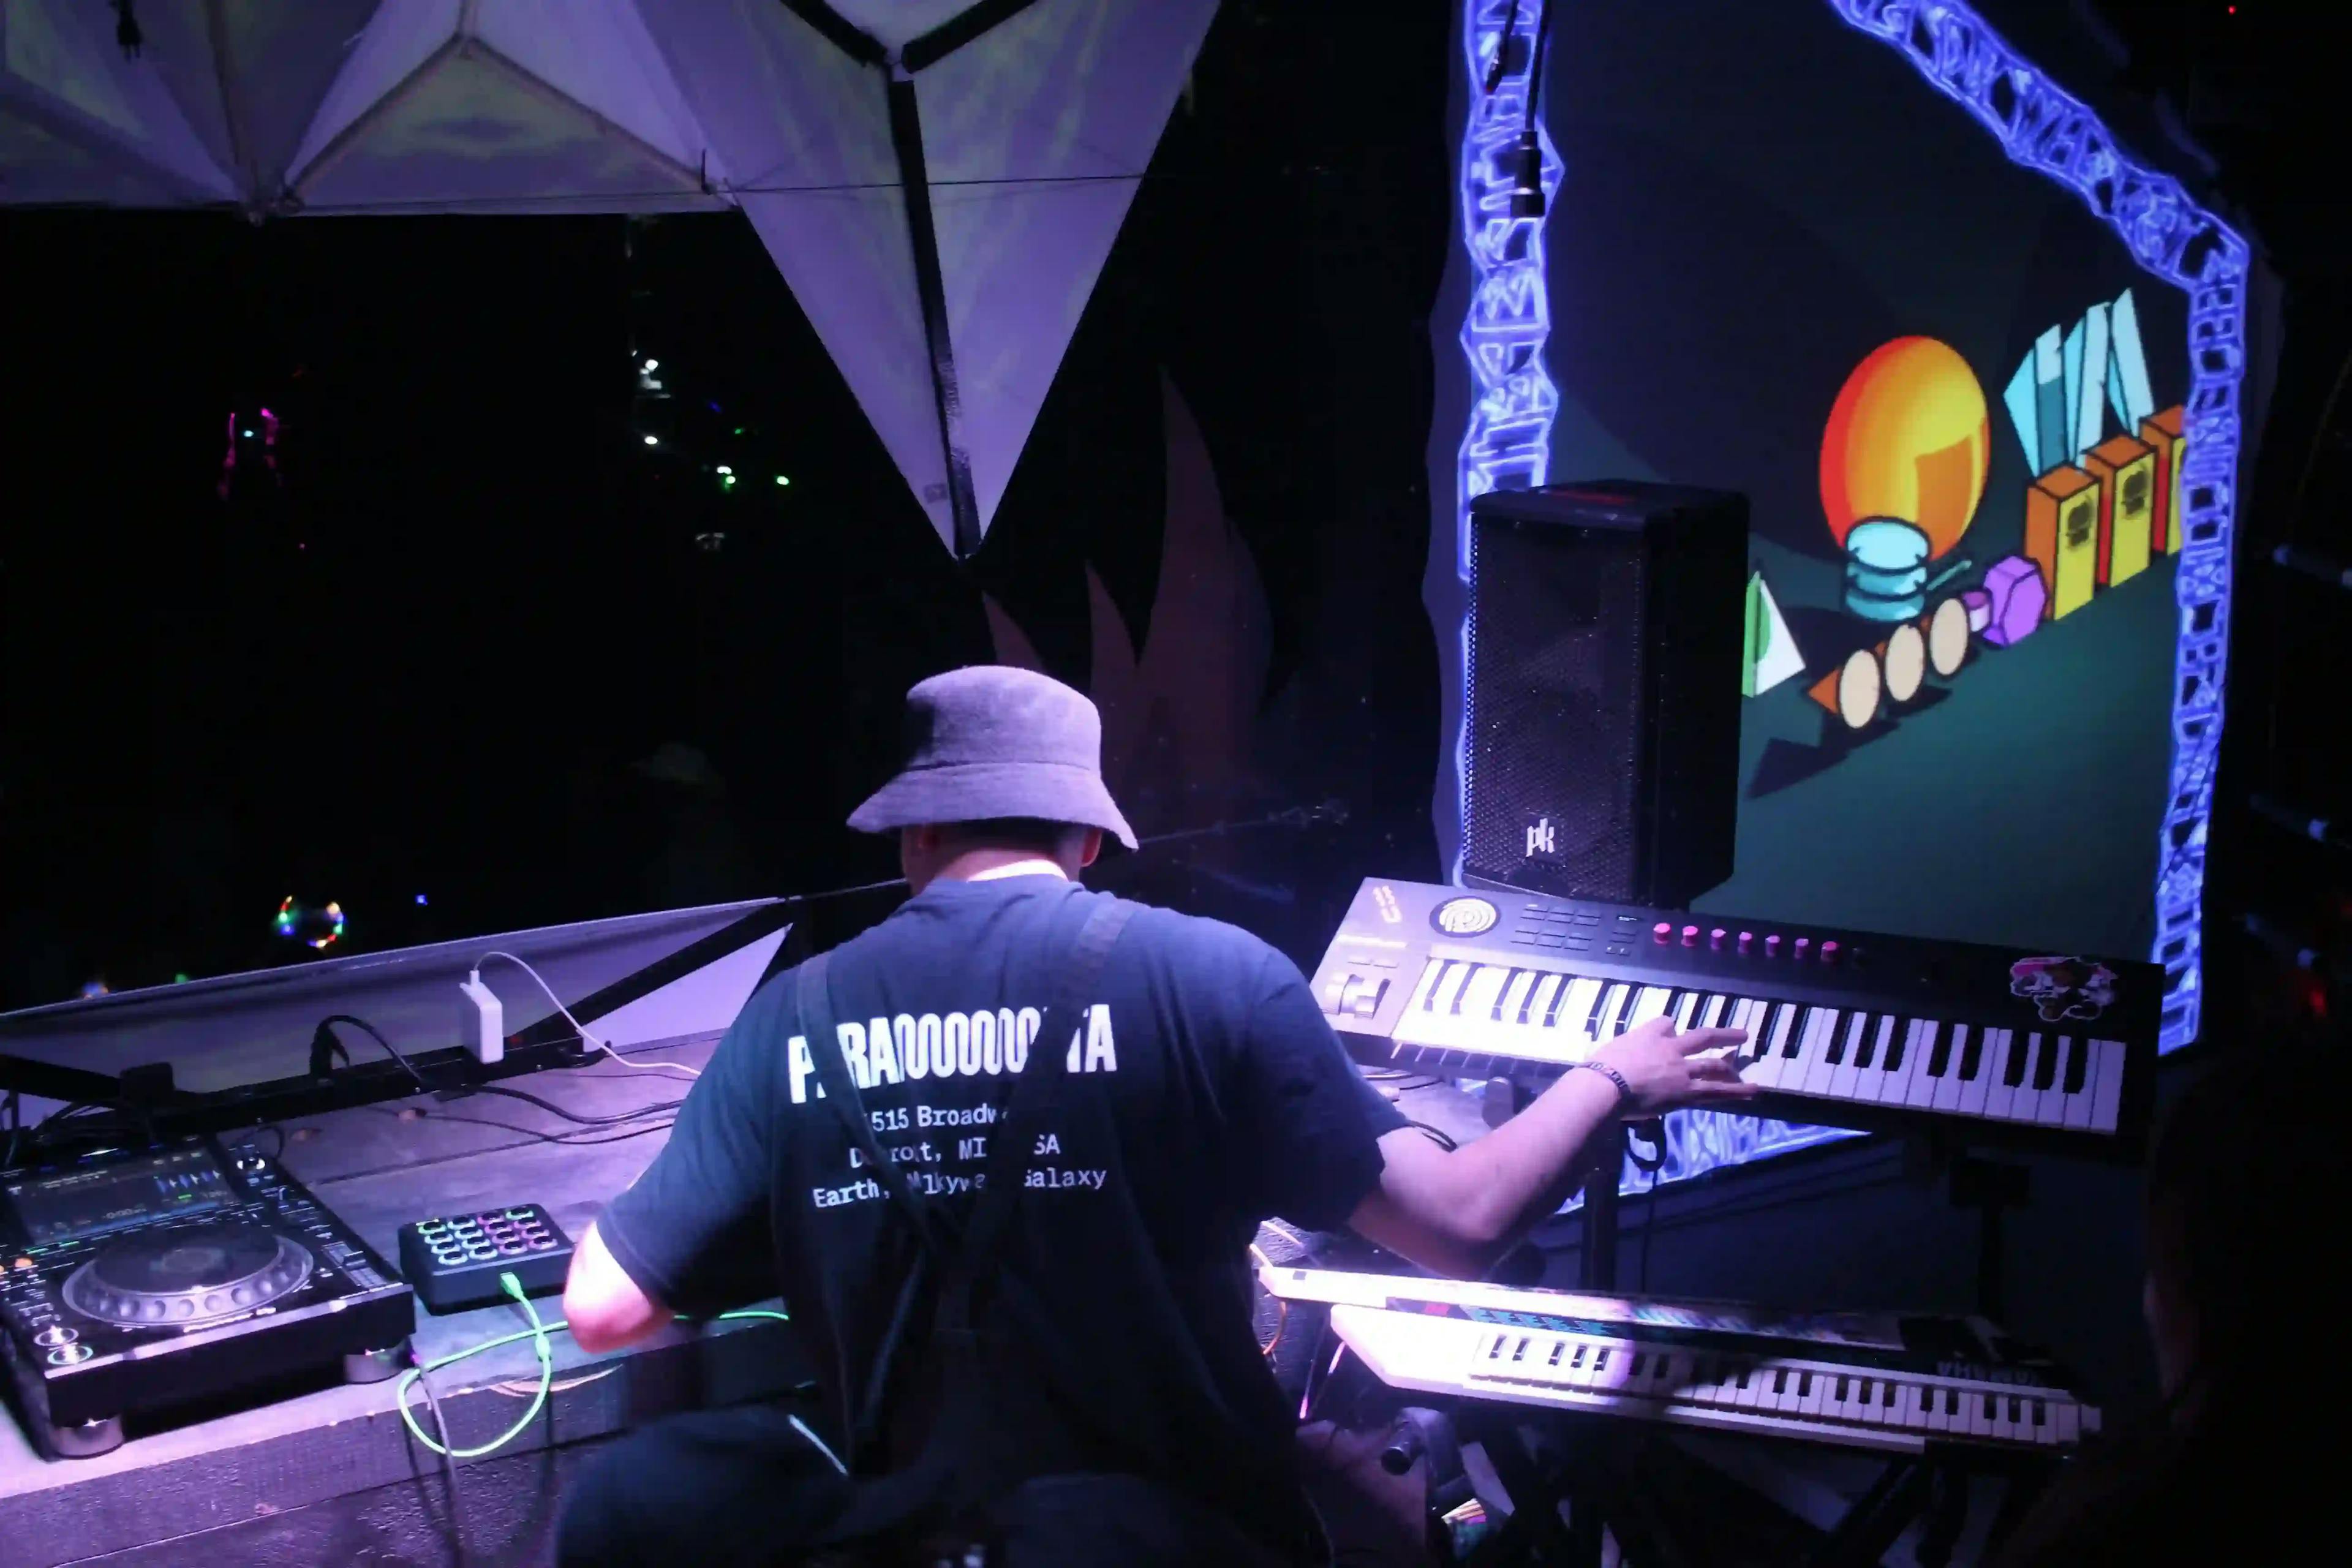 Rear view of a DJ performing to a crowd at Asgard stage, under a tent with lighting equipment.